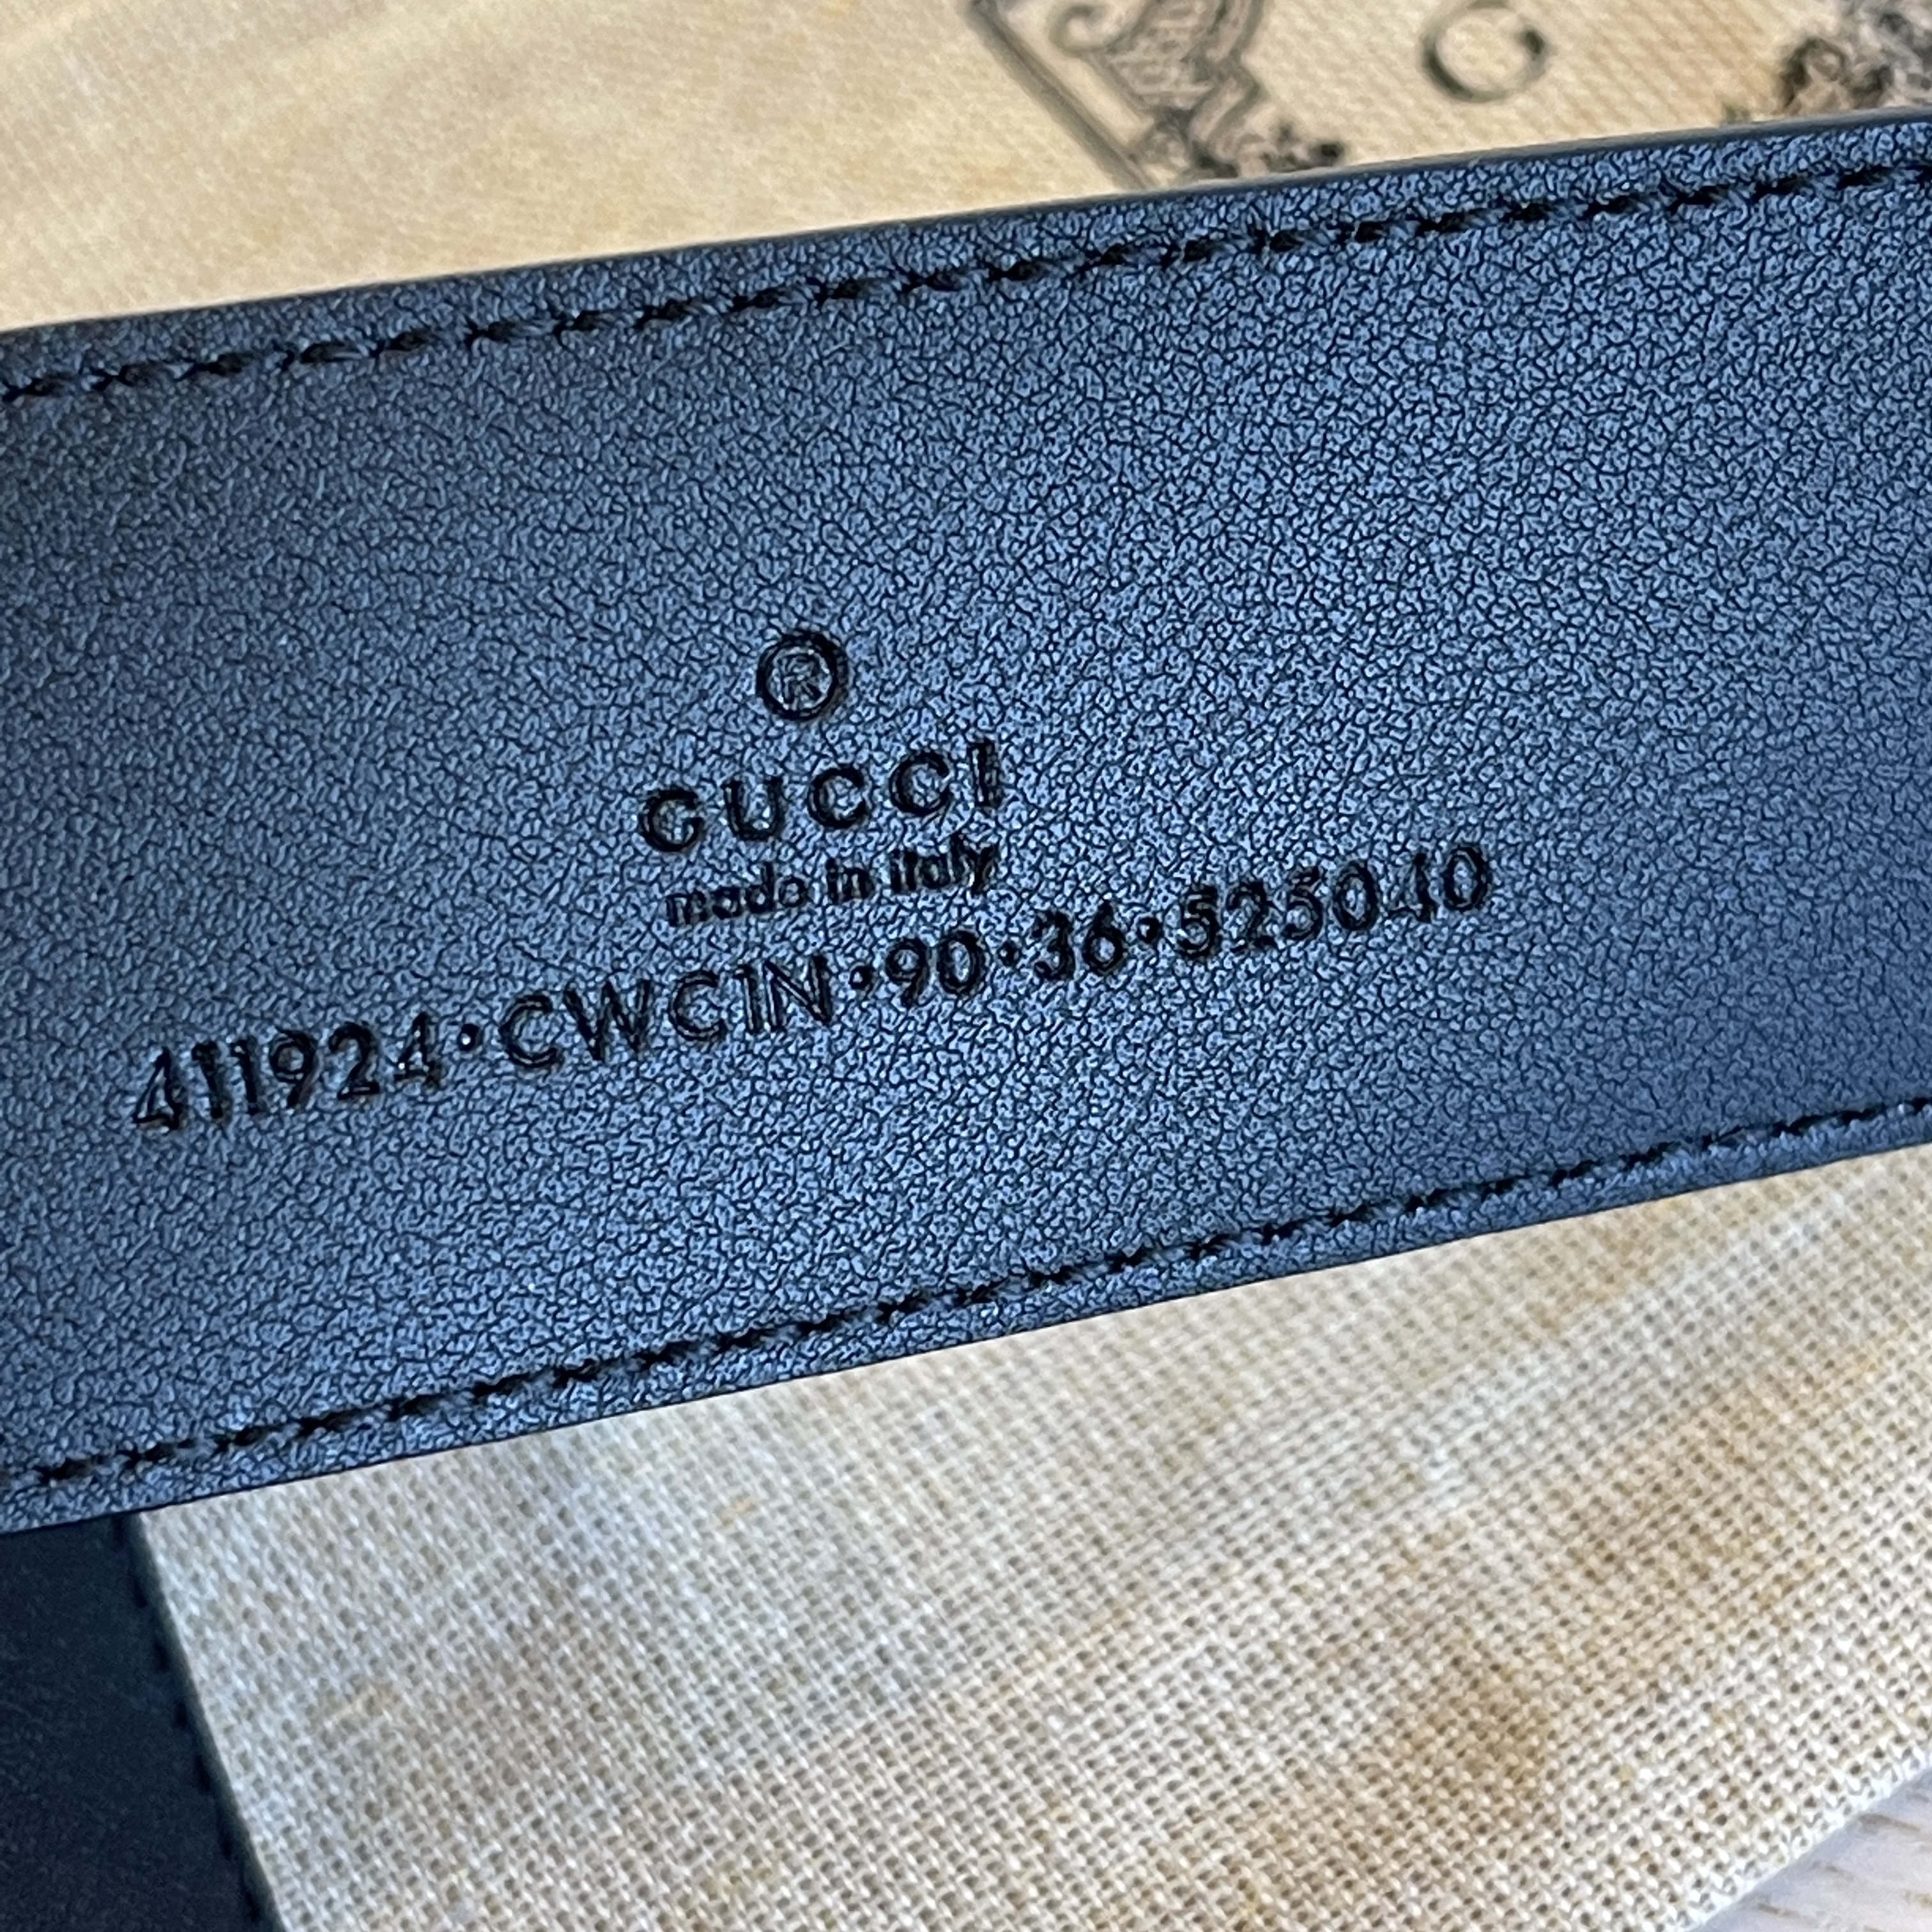 Gucci Signature Leather Belt Red 370543 Size 90/36